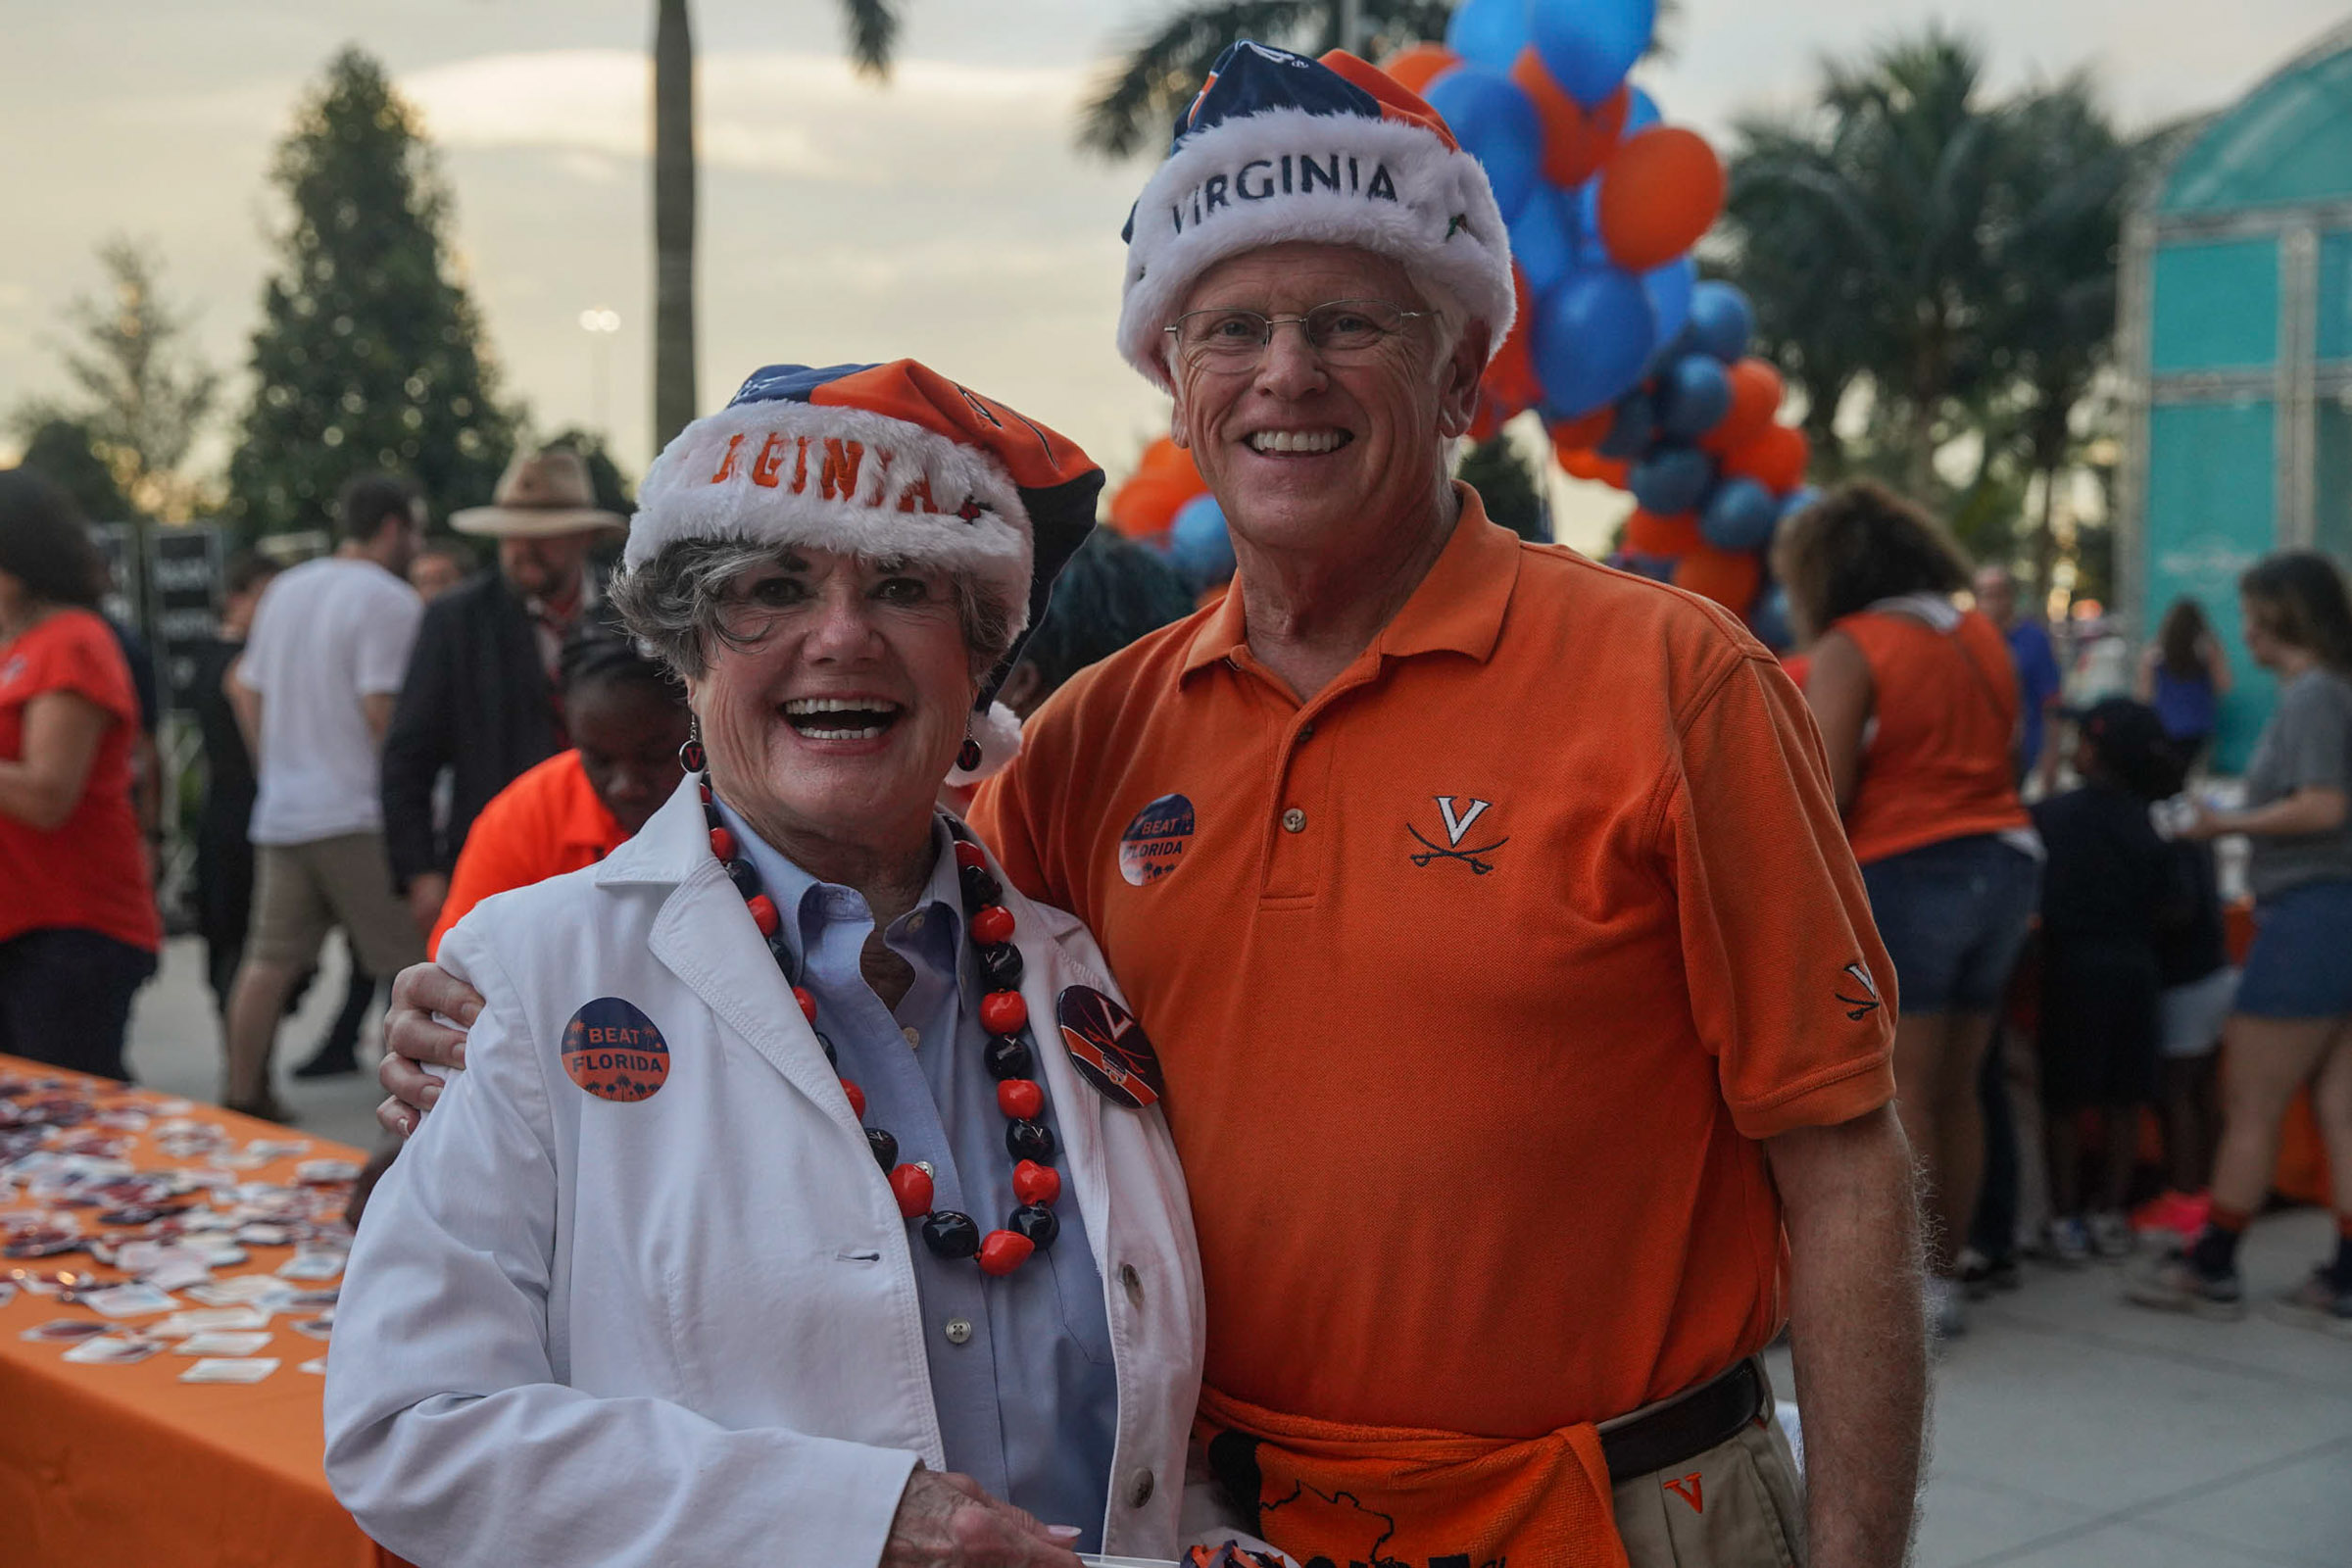 Les Wagner, right, and Elizabeth Brey, left stand together for a photo decked out in Blue and orange